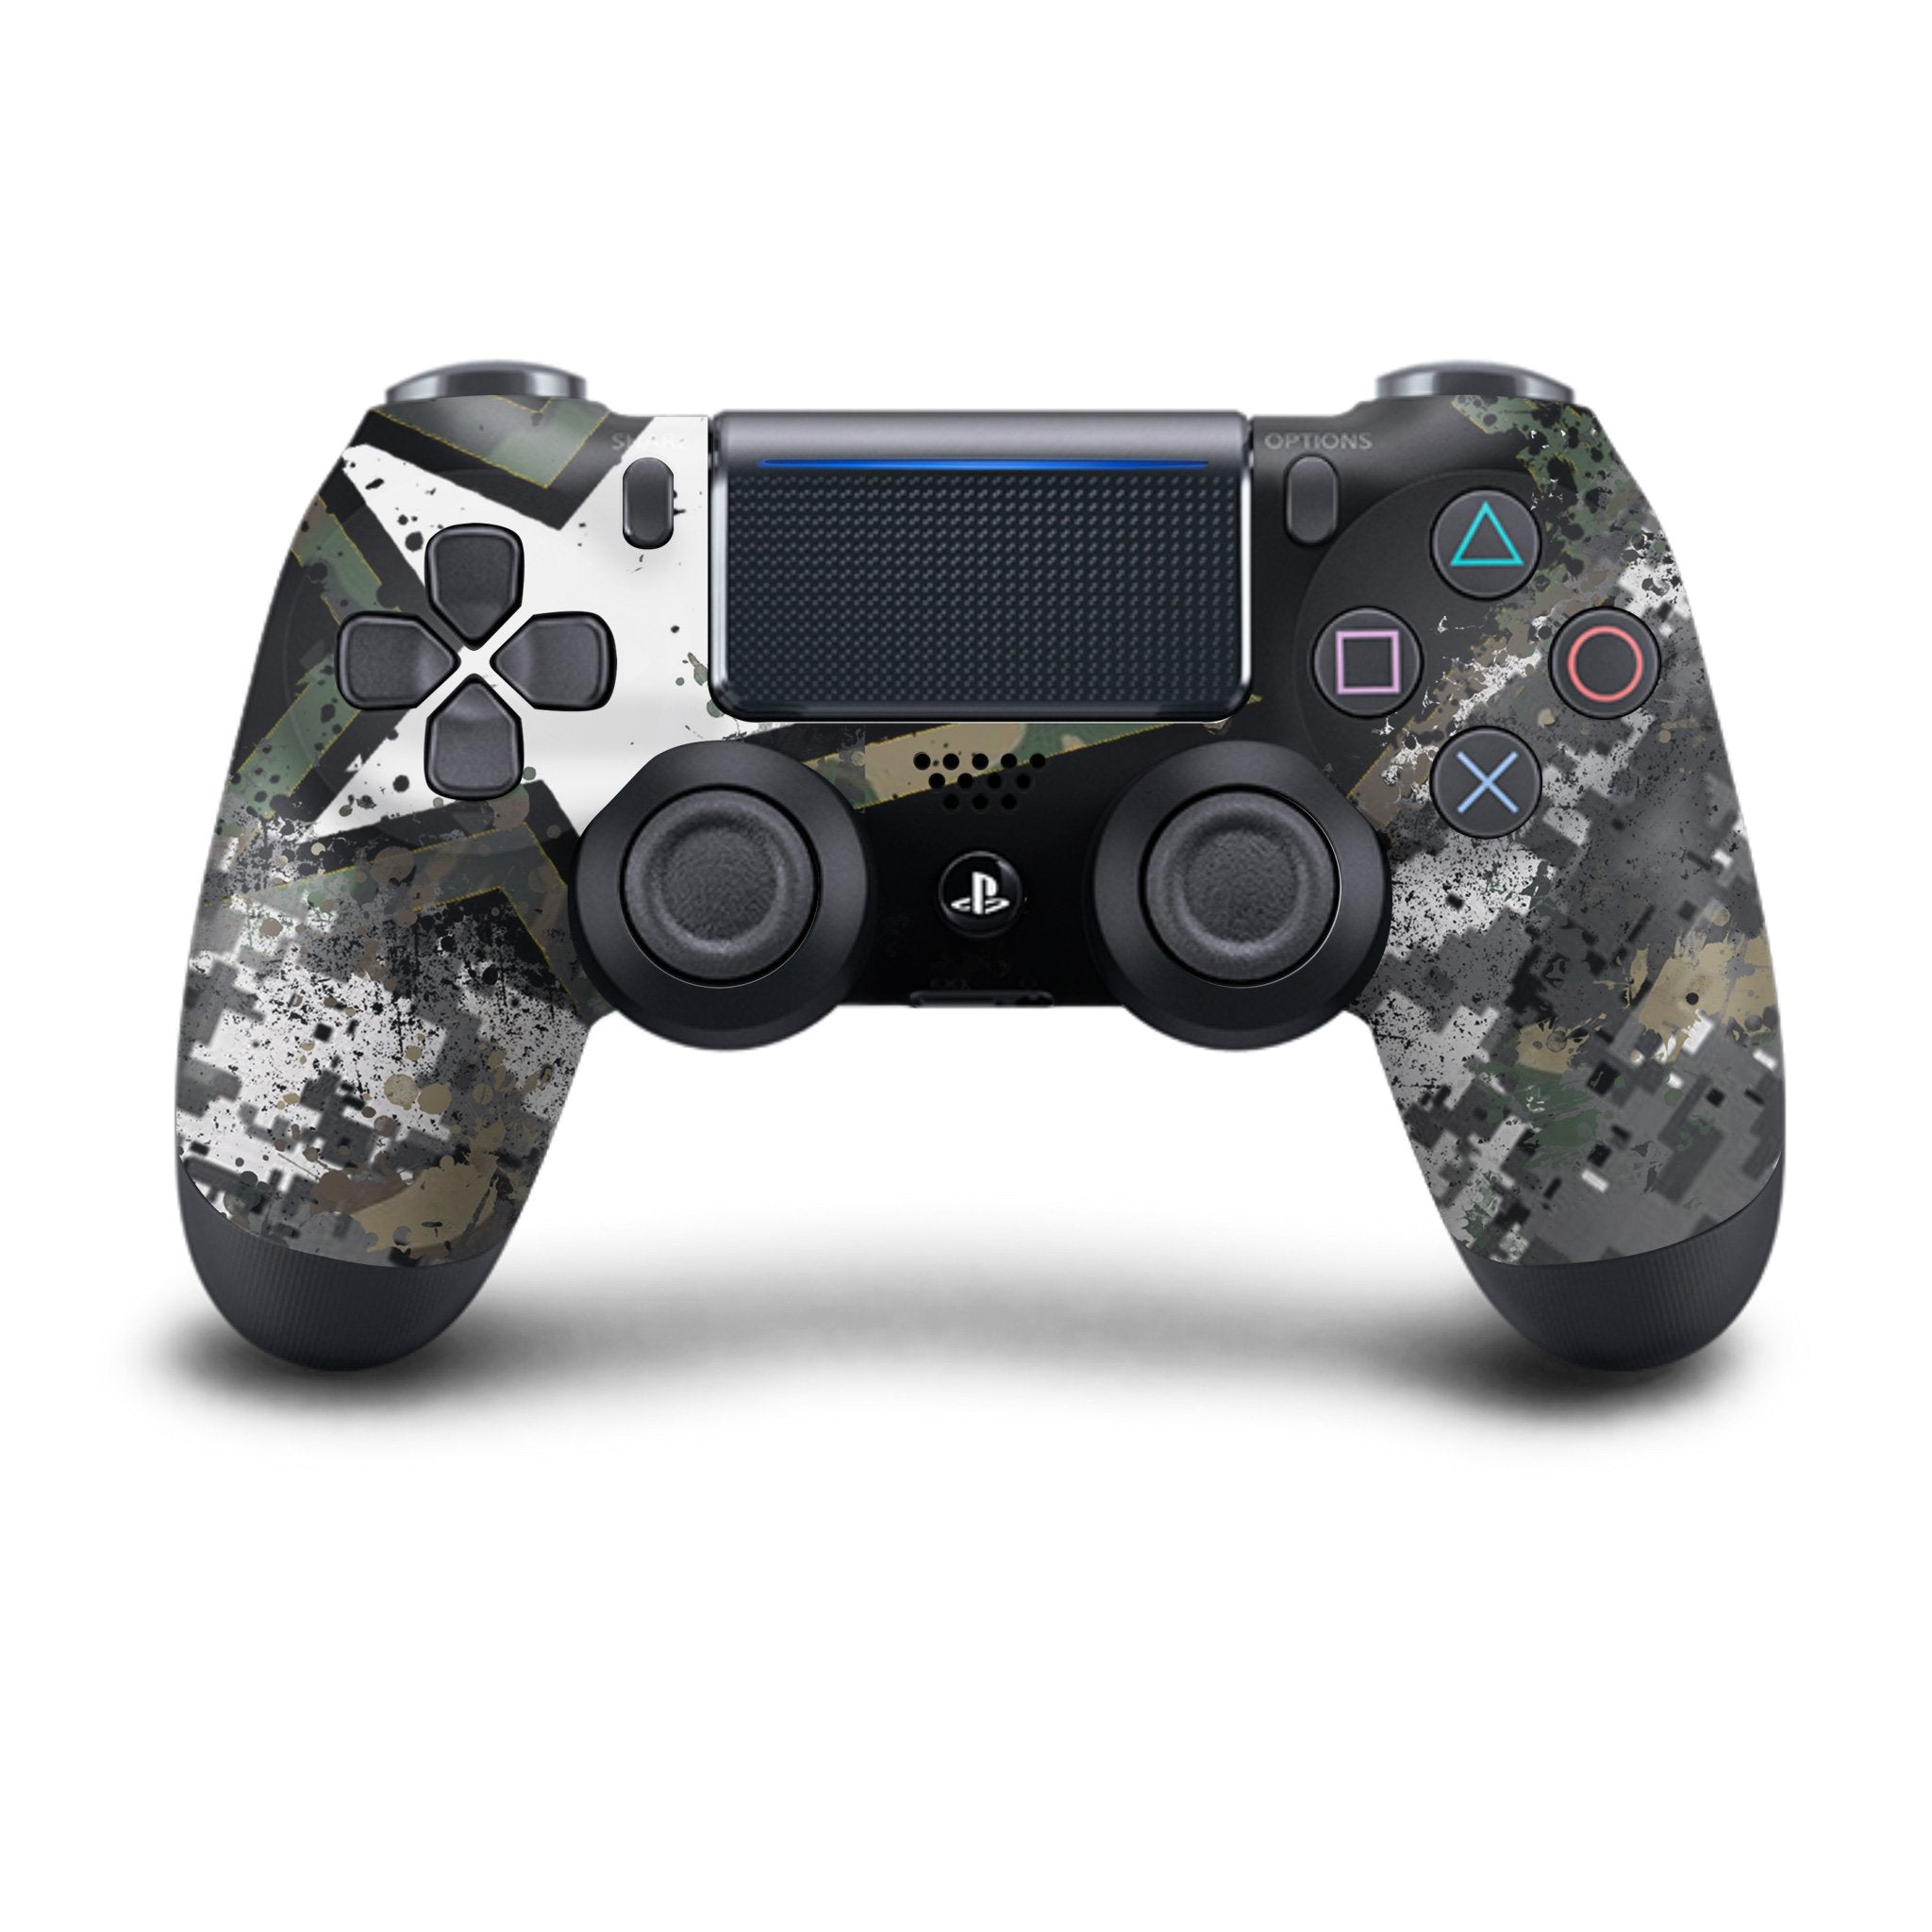 U.S Army Ps4 Custom Controller Exclusive